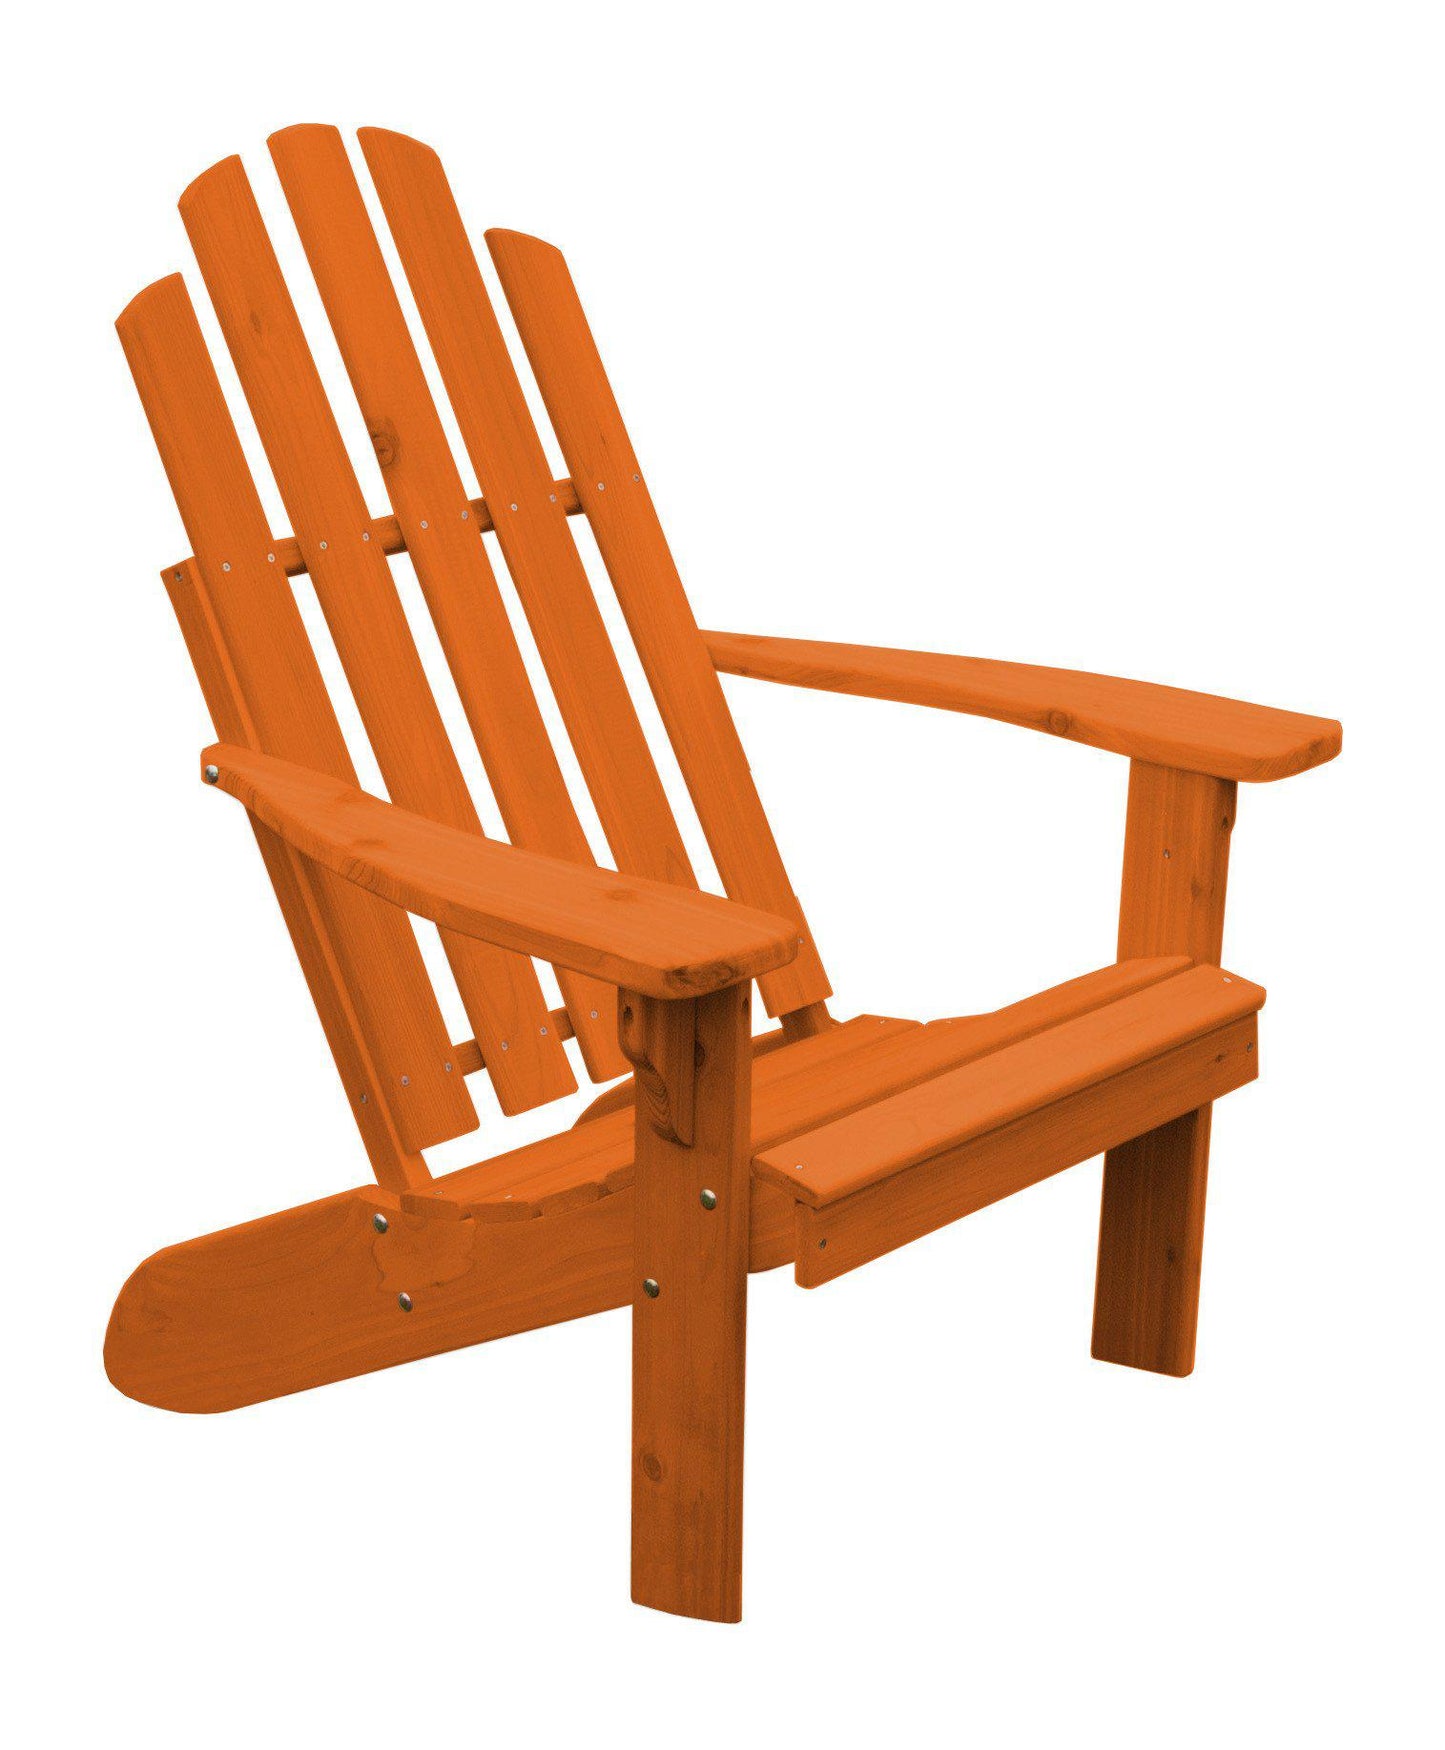 A&L FURNITURE CO. Western Red Cedar Kennebunkport Adirondack Chair - LEAD TIME TO SHIP 4 WEEKS OR LESS